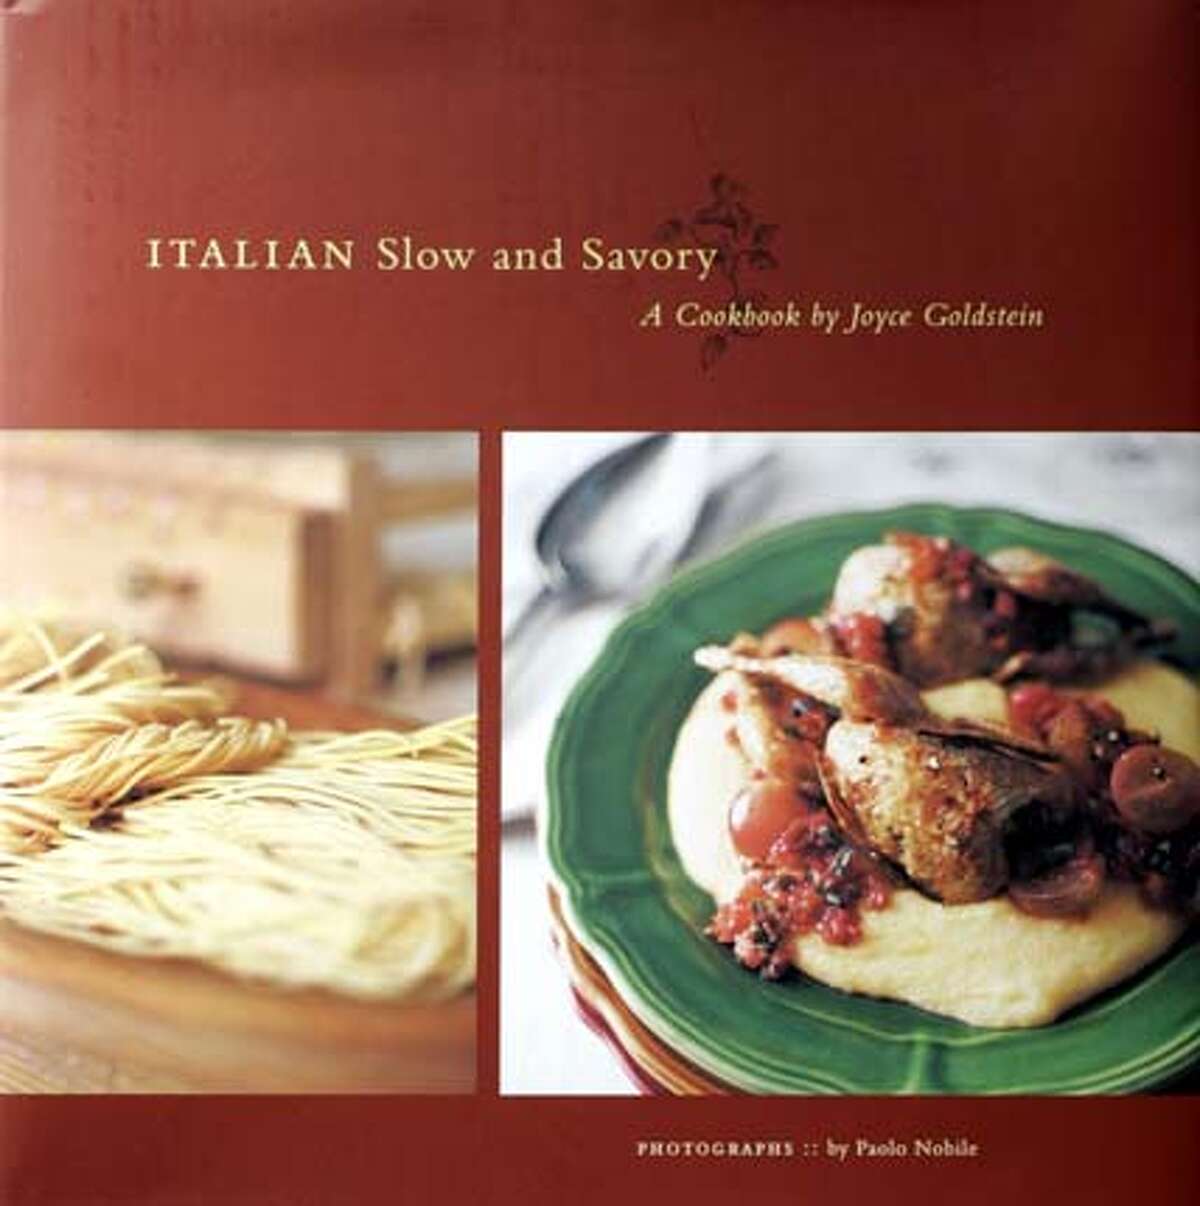 Cookbooks. Italian Slow and Savory by Joyce Goldstein. Event on 11/19/04 in San Francisco. Craig Lee / The Chronicle